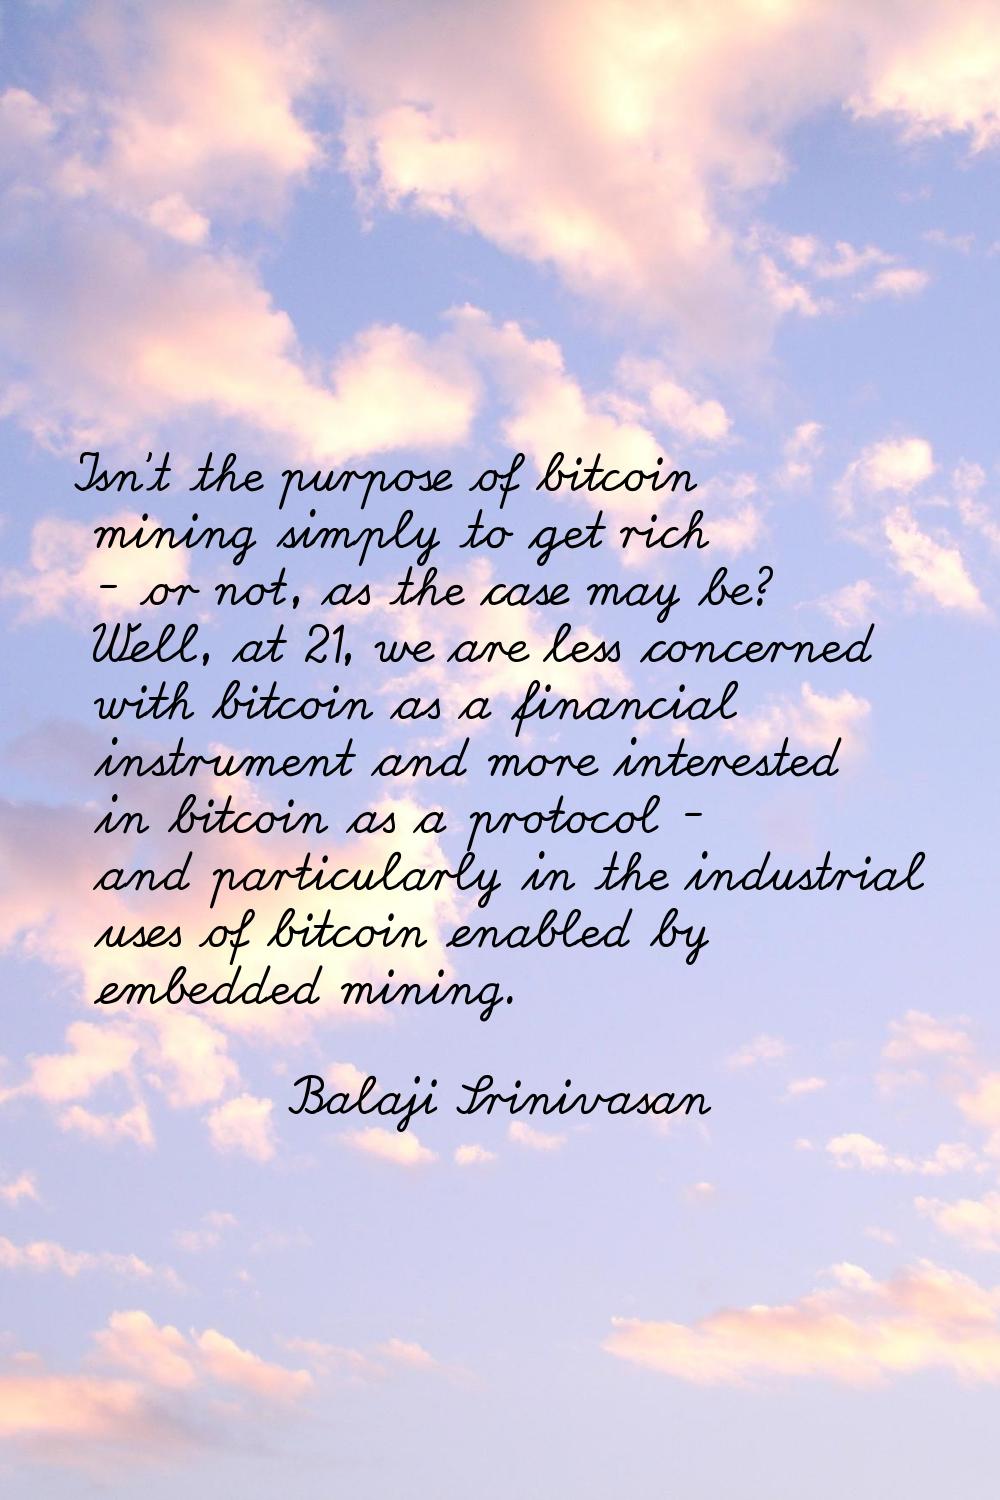 Isn't the purpose of bitcoin mining simply to get rich - or not, as the case may be? Well, at 21, w